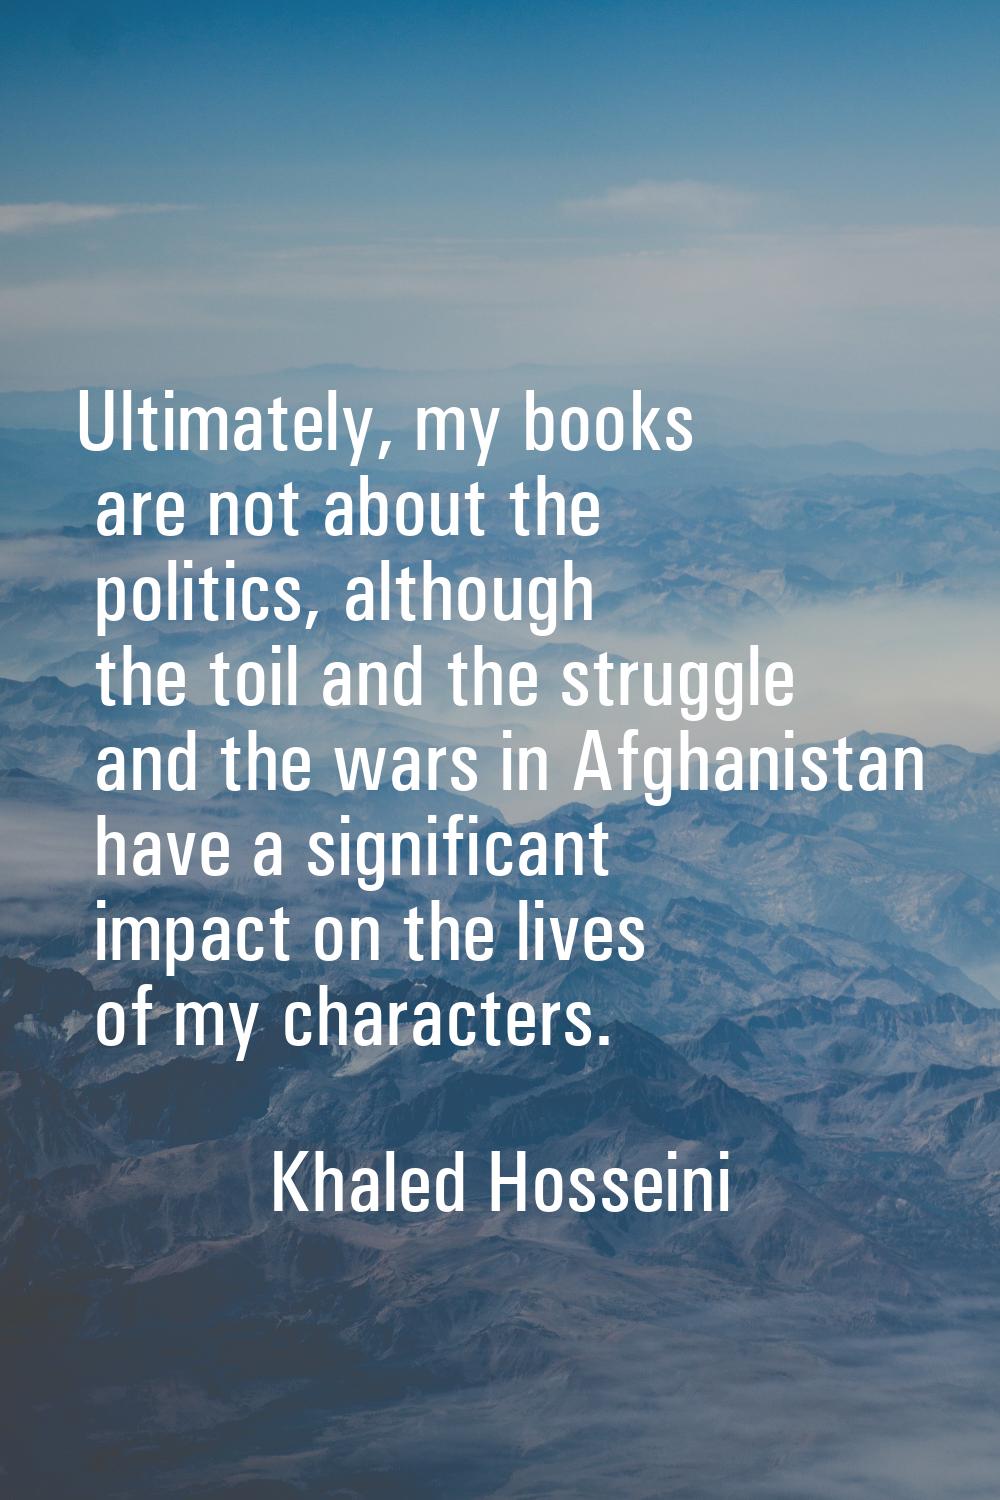 Ultimately, my books are not about the politics, although the toil and the struggle and the wars in